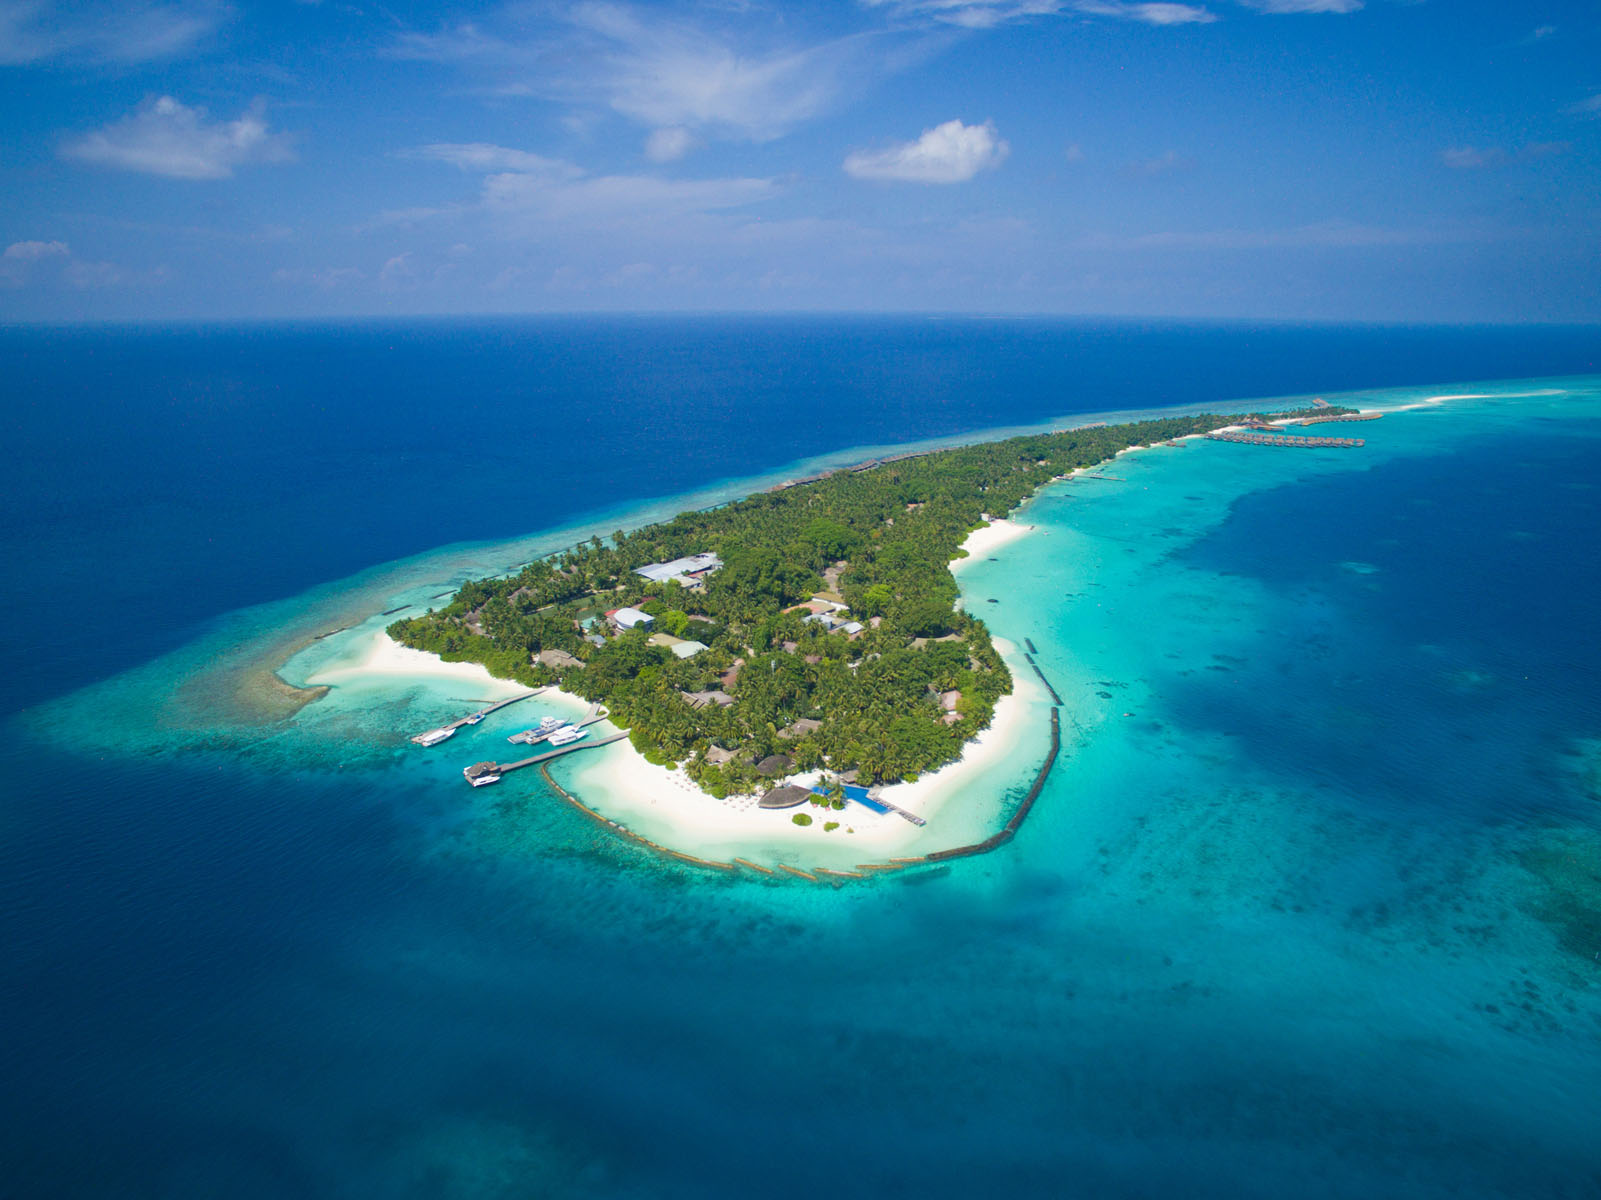 Maldives - The King Of Islands